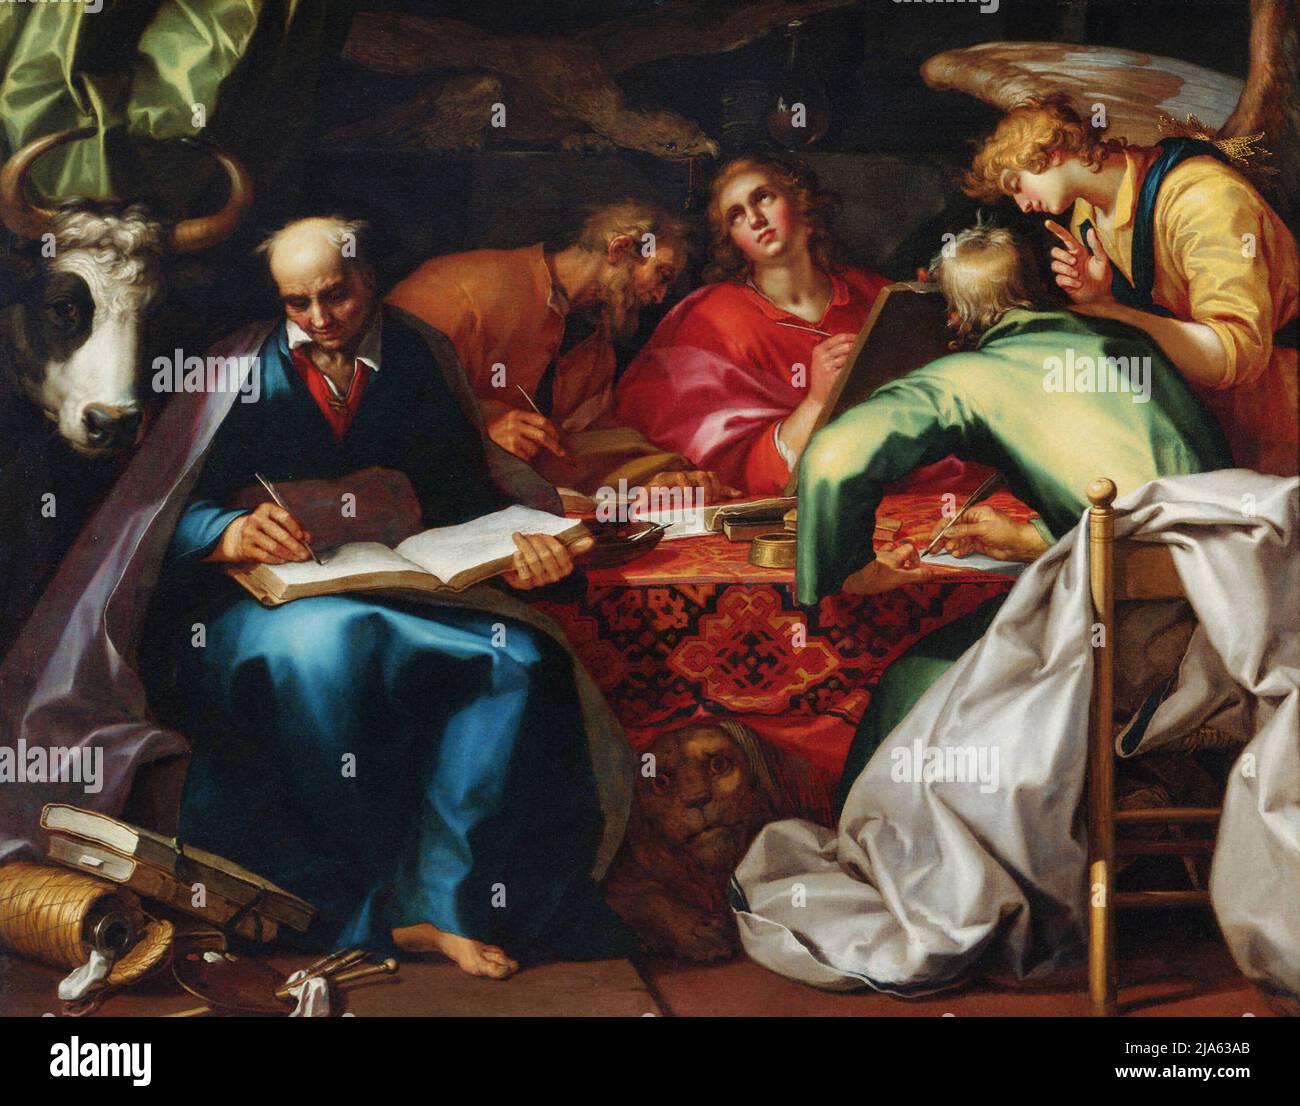 The Four Evangelists by Abraham Bloemaert, Stock Photo